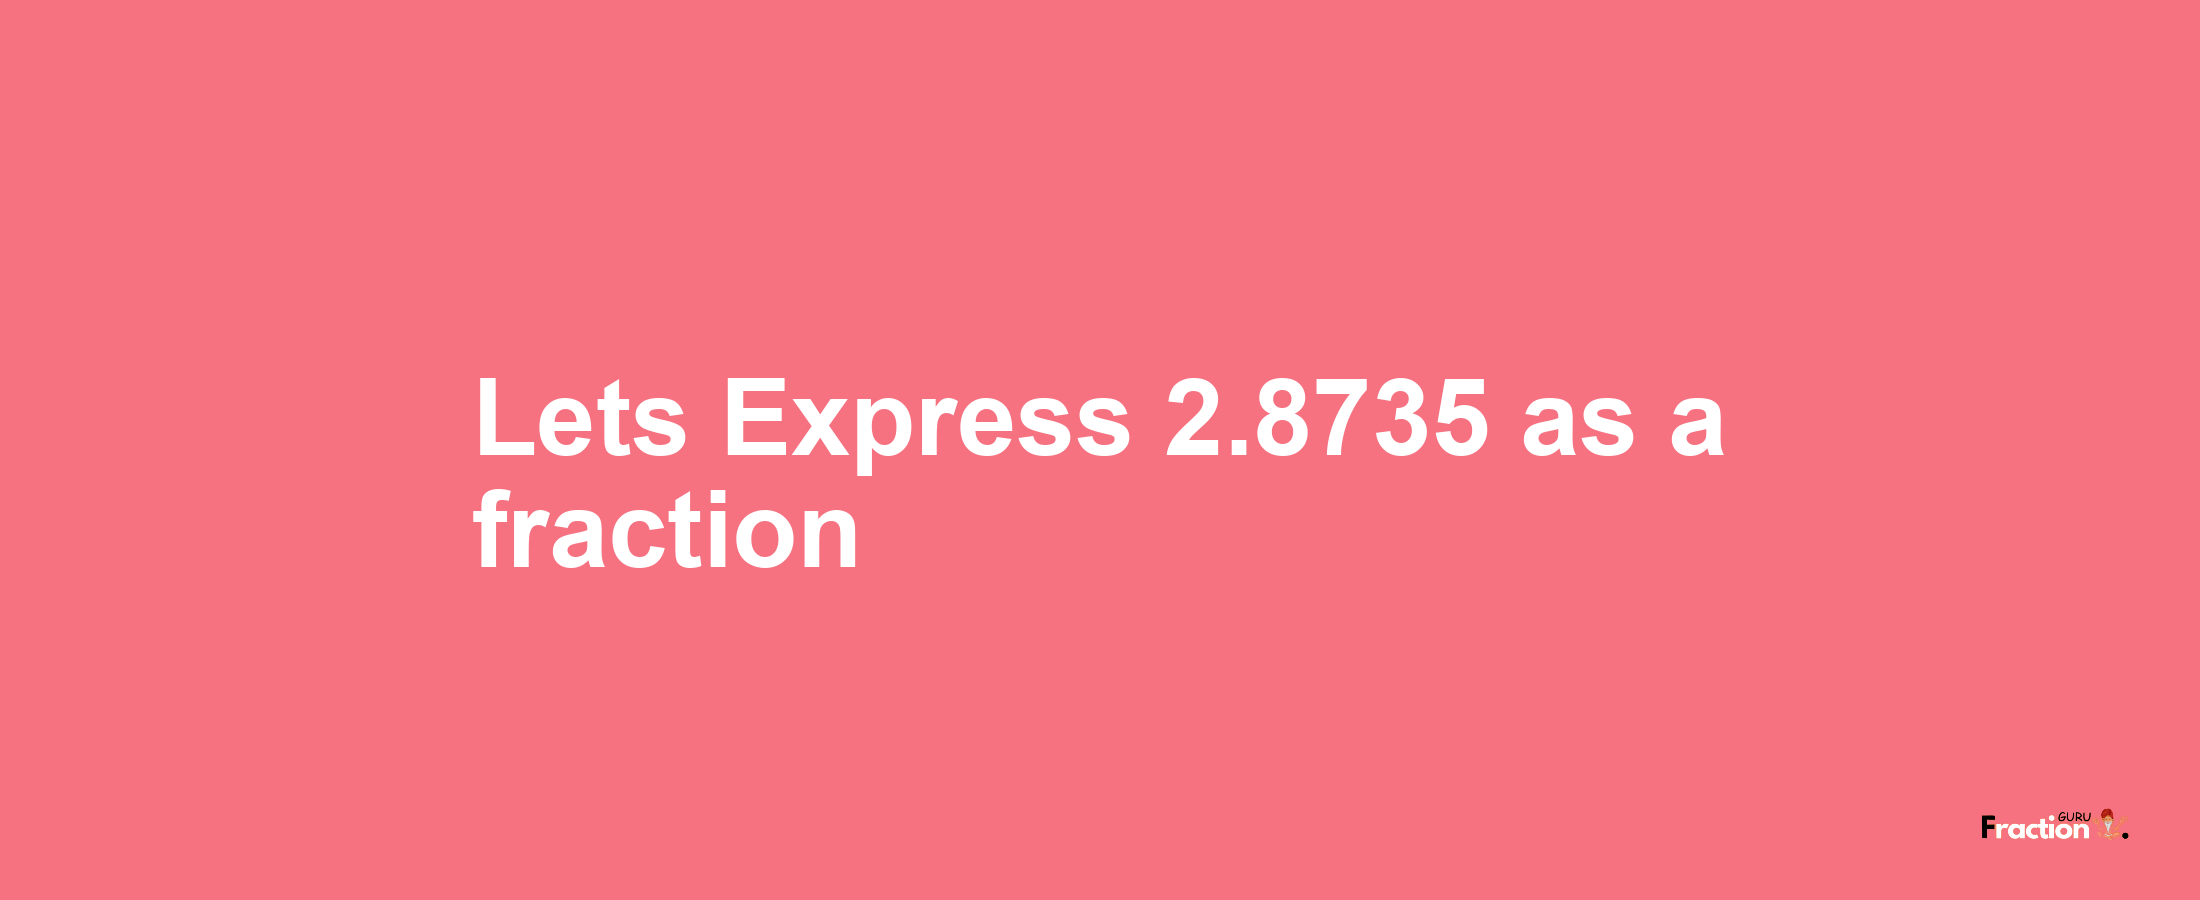 Lets Express 2.8735 as afraction